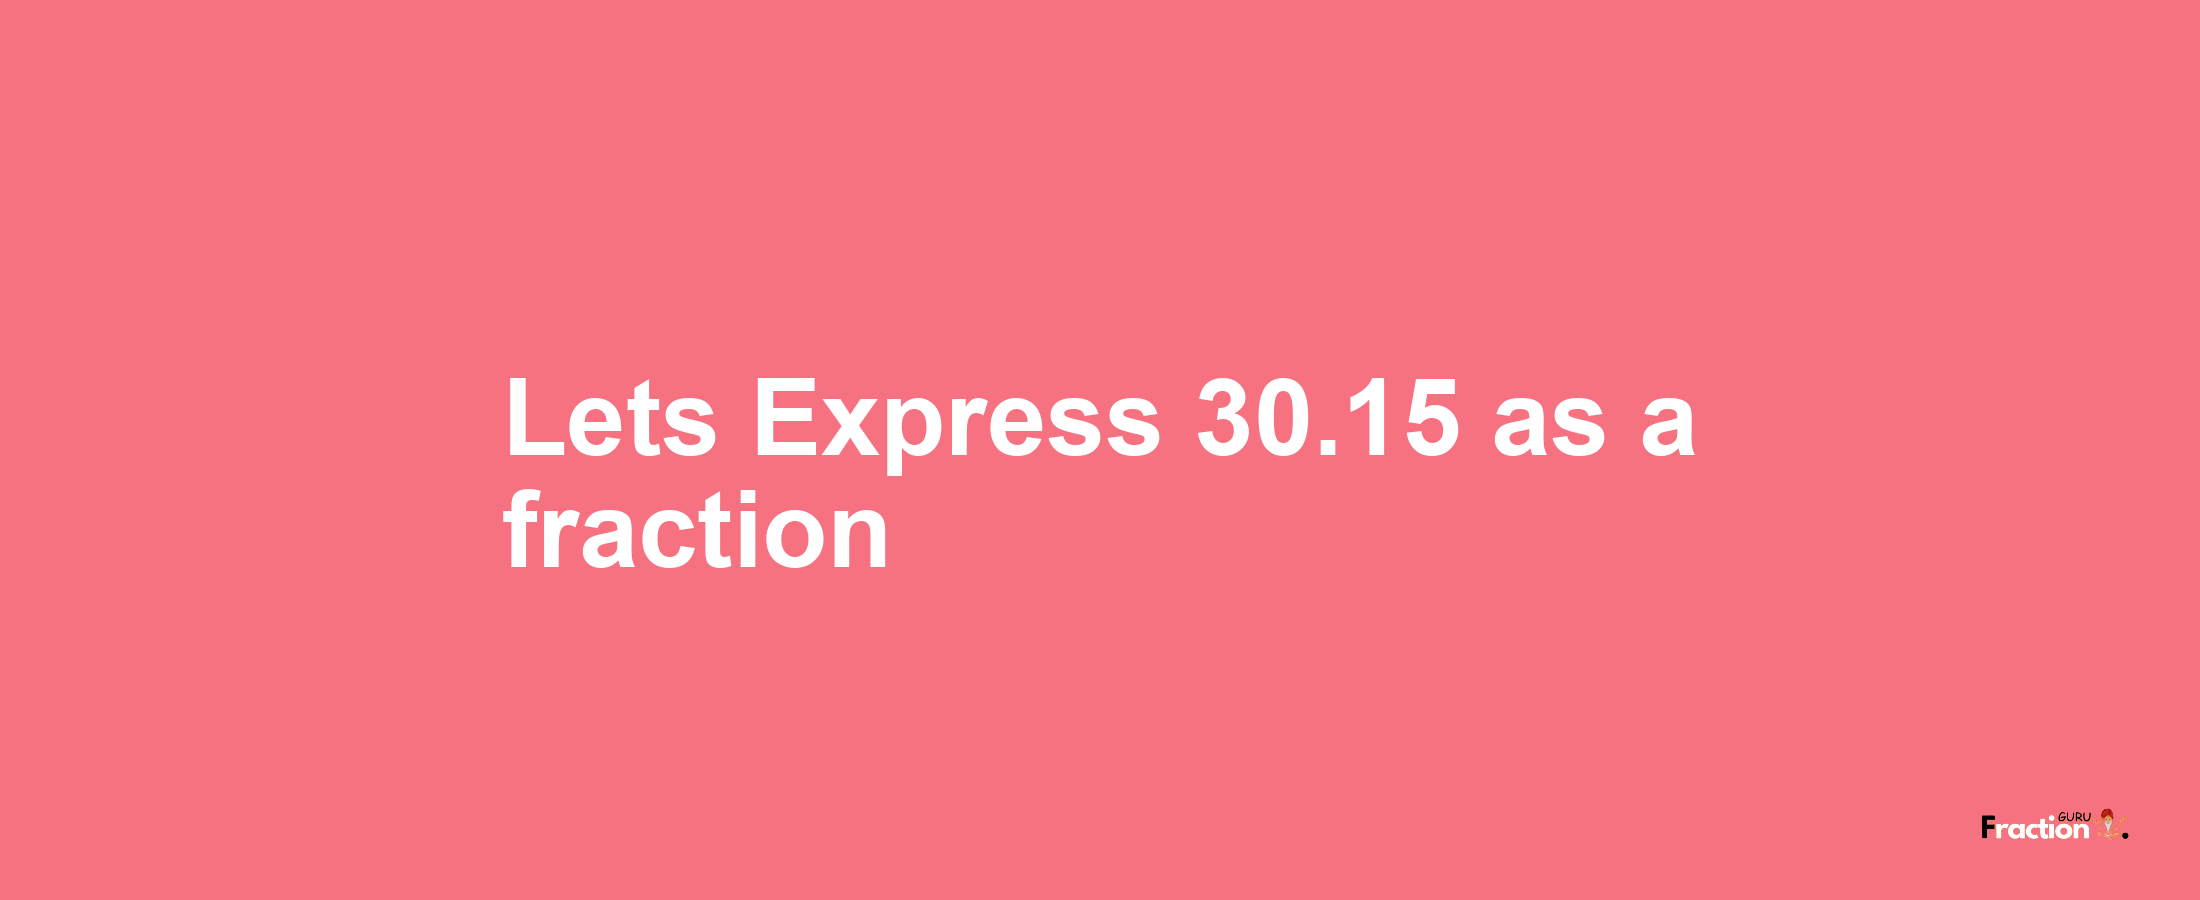 Lets Express 30.15 as afraction